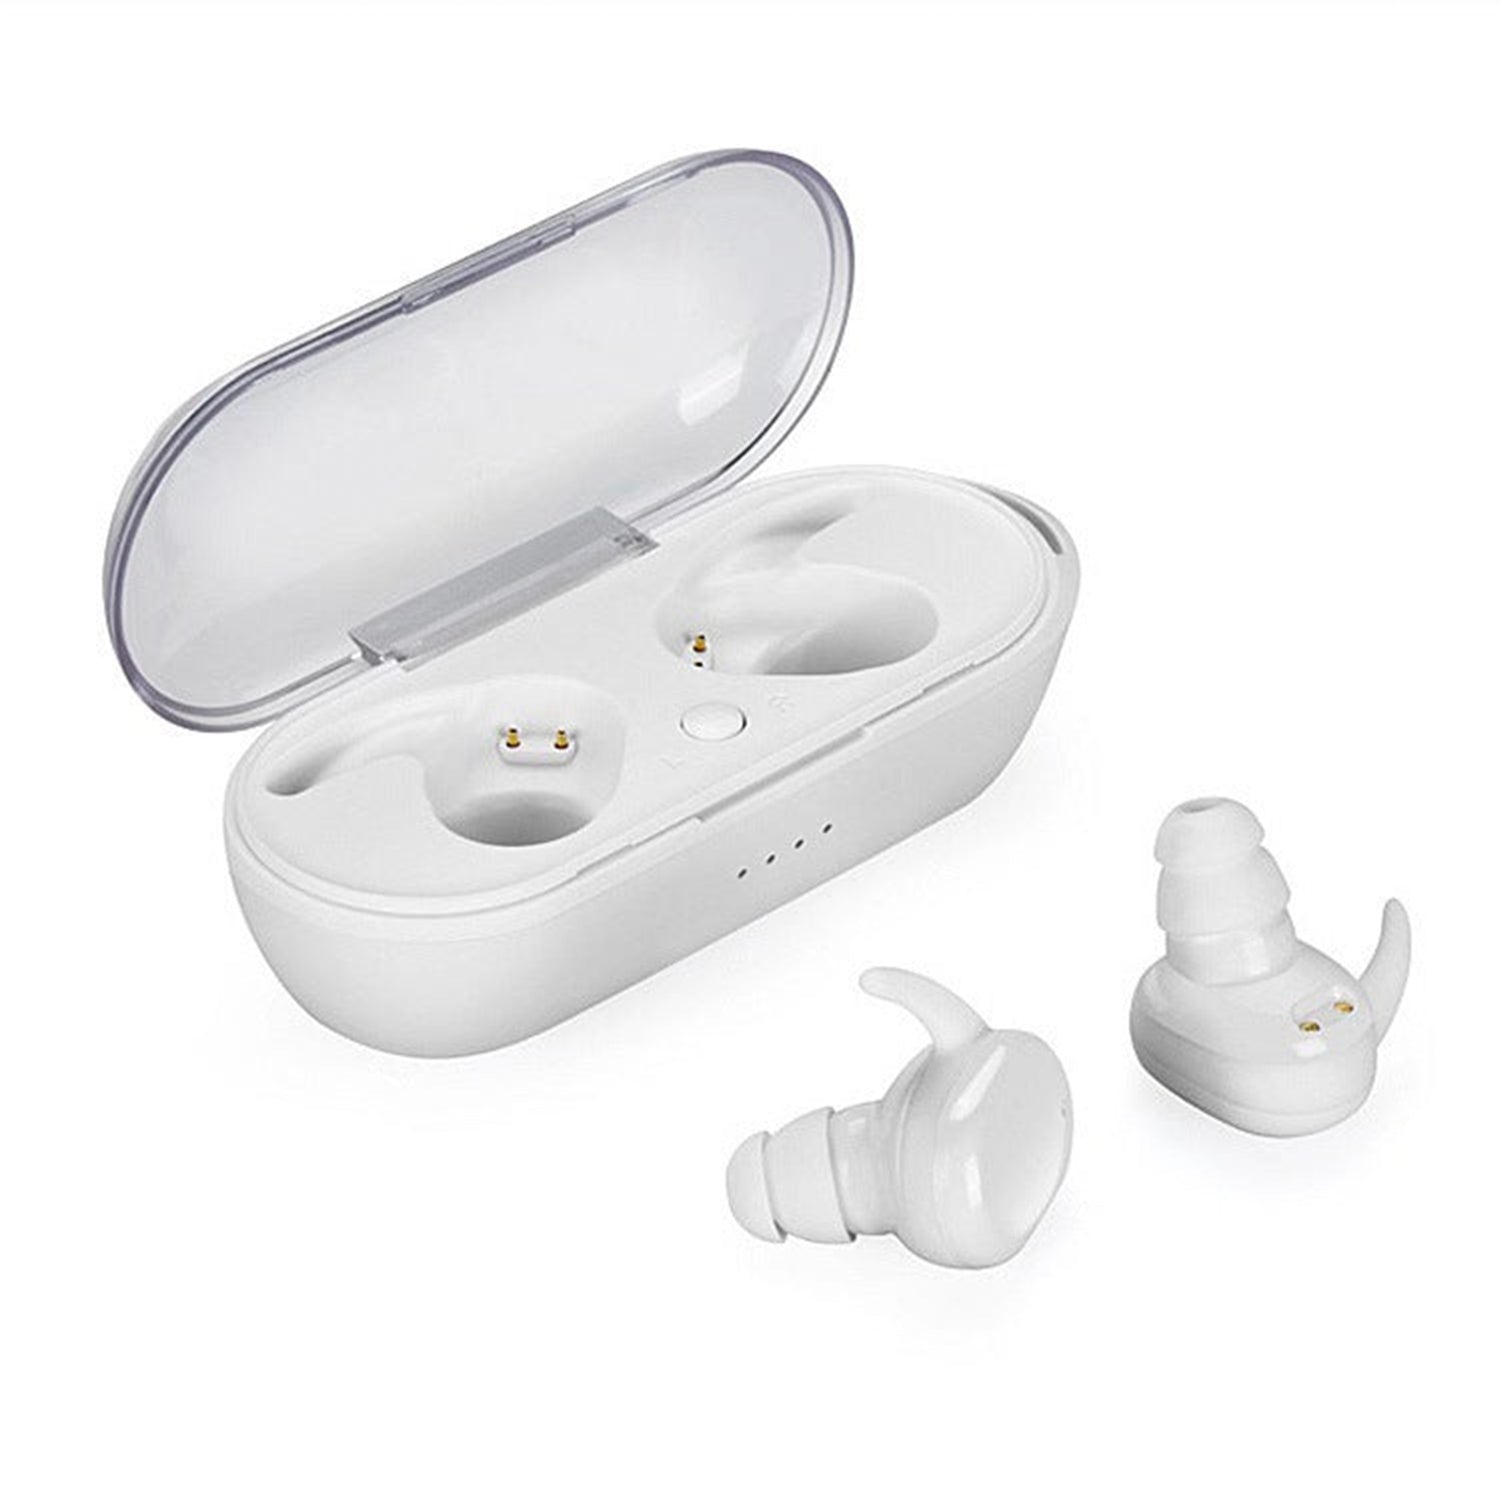 Bluetooth Headphones 5.0 True Wireless Earbuds Auto Pairing with Built in Mic and Portable Charging Case